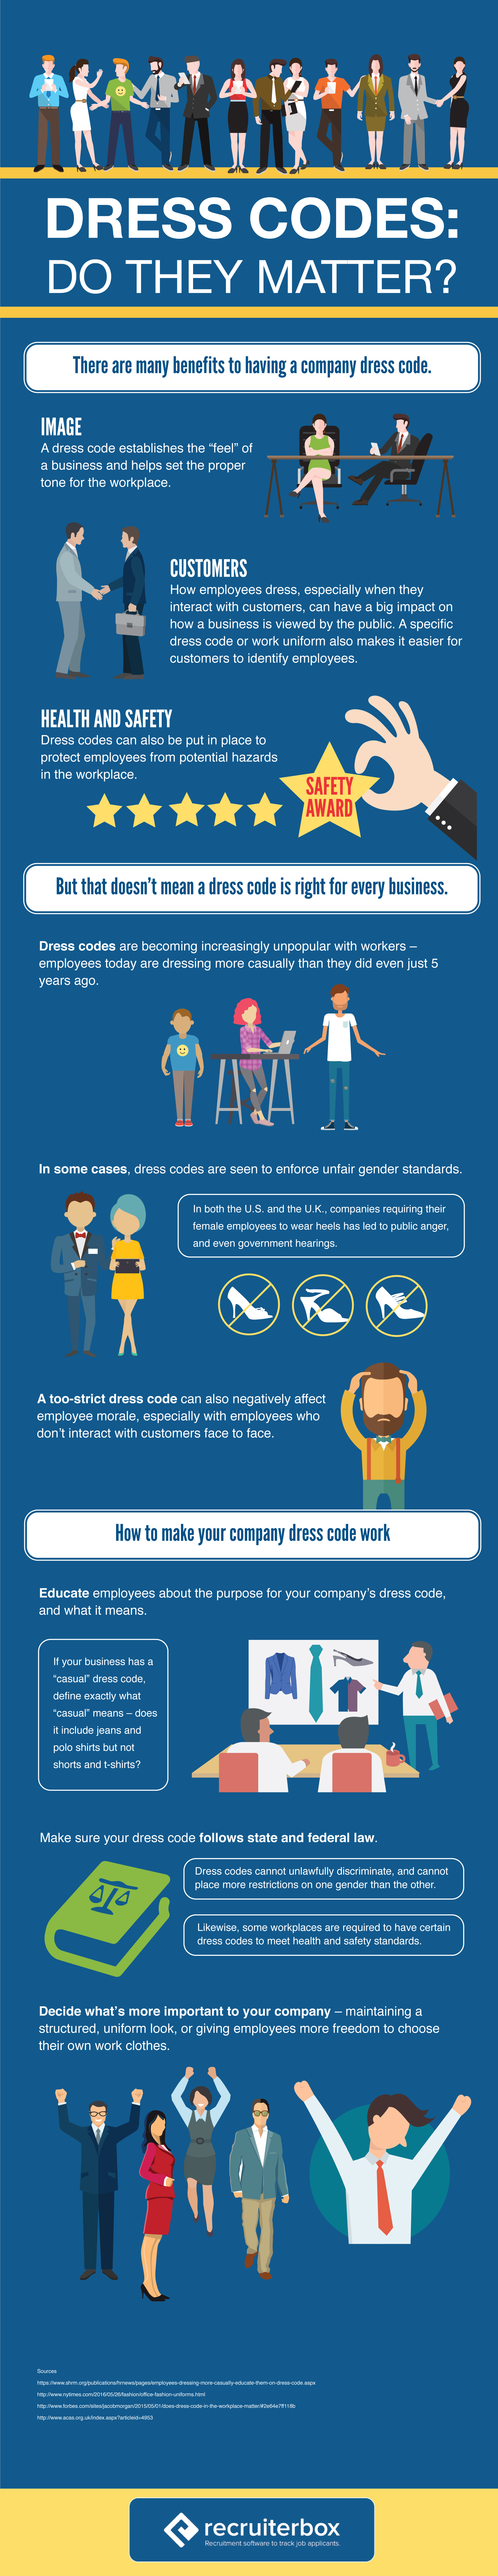 Dress Codes & What They Mean [Infographic] - His & Her Guide To Appropriate  Attire For Each Dress Code